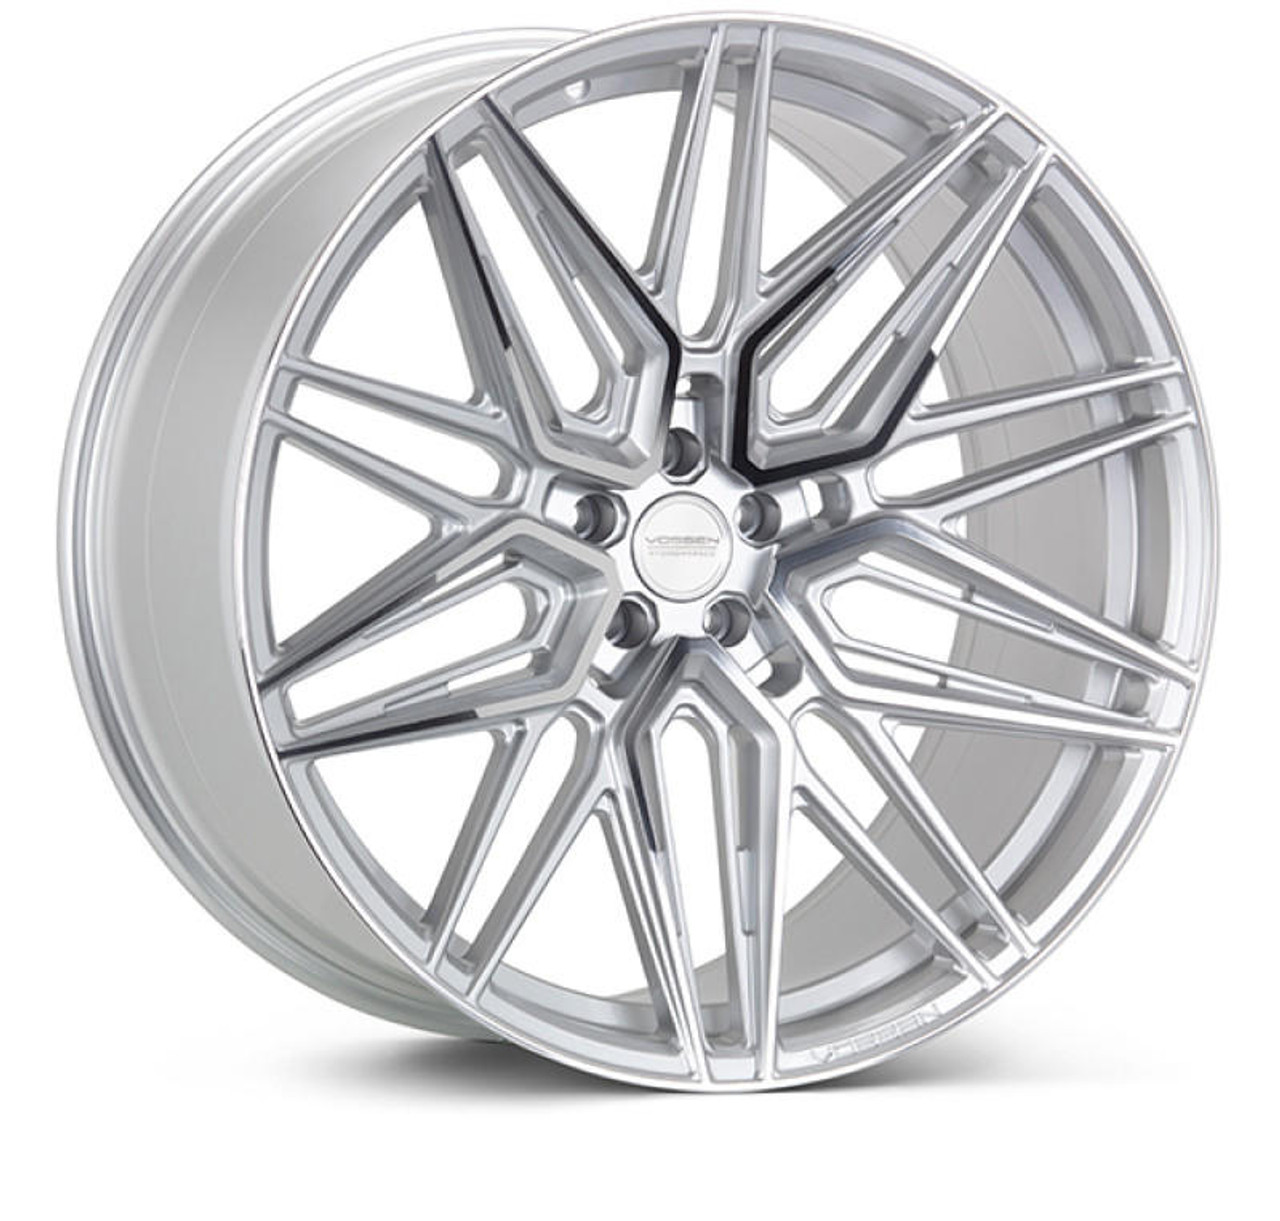  Vossen HF-7 23x10.5 / 5x130 / ET21 / Mid Face / 71.6 - Silver Polished - HF7-3P54 